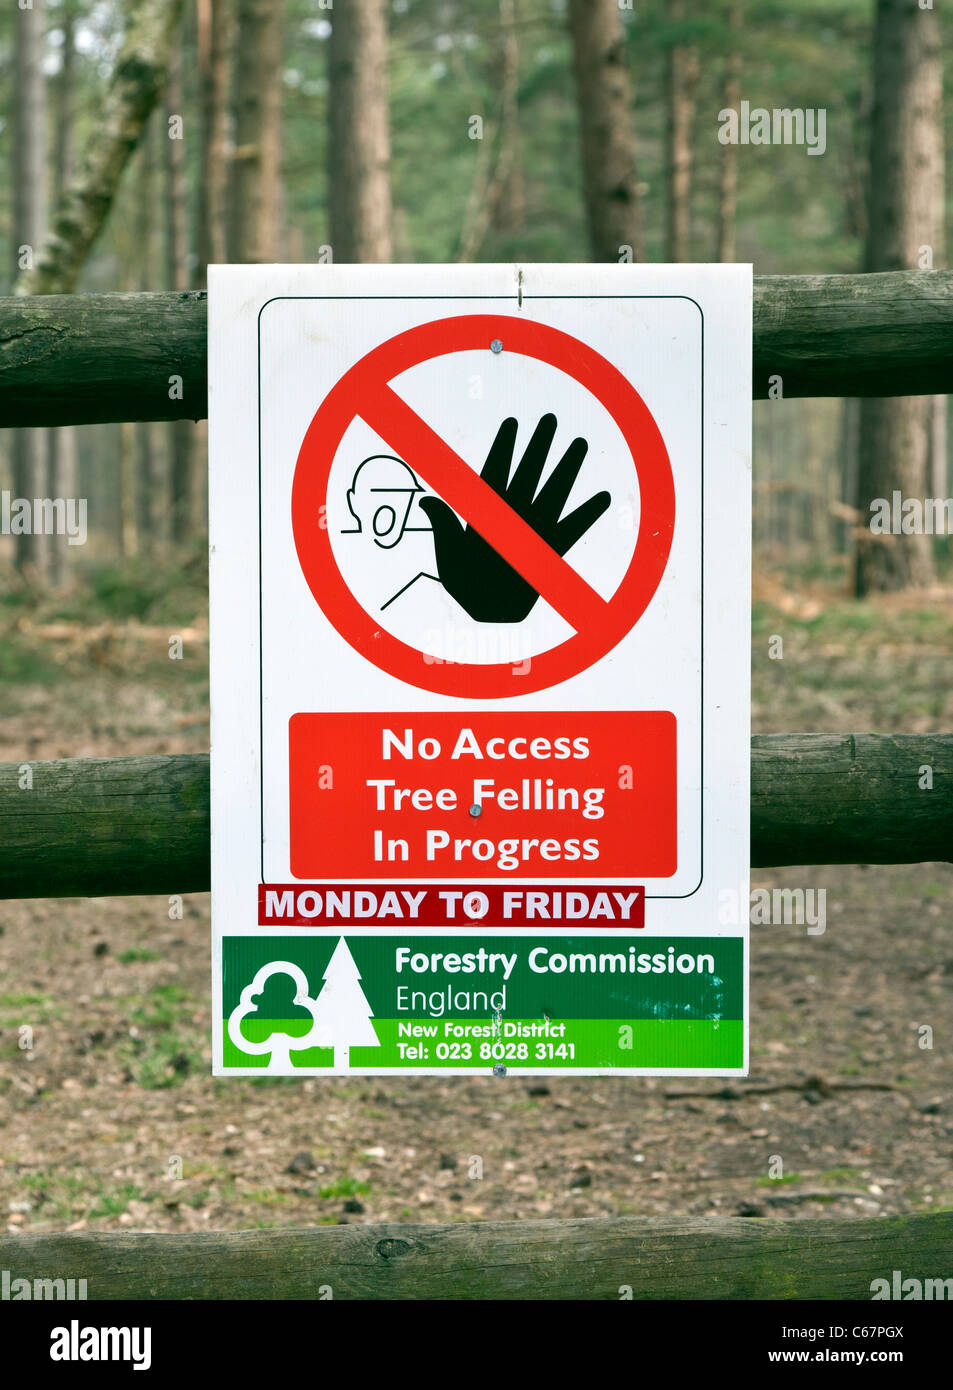 Forestry Commission Forest Operations Warning Sign fence trees No access Tree Felling polite notice information Stock Photo